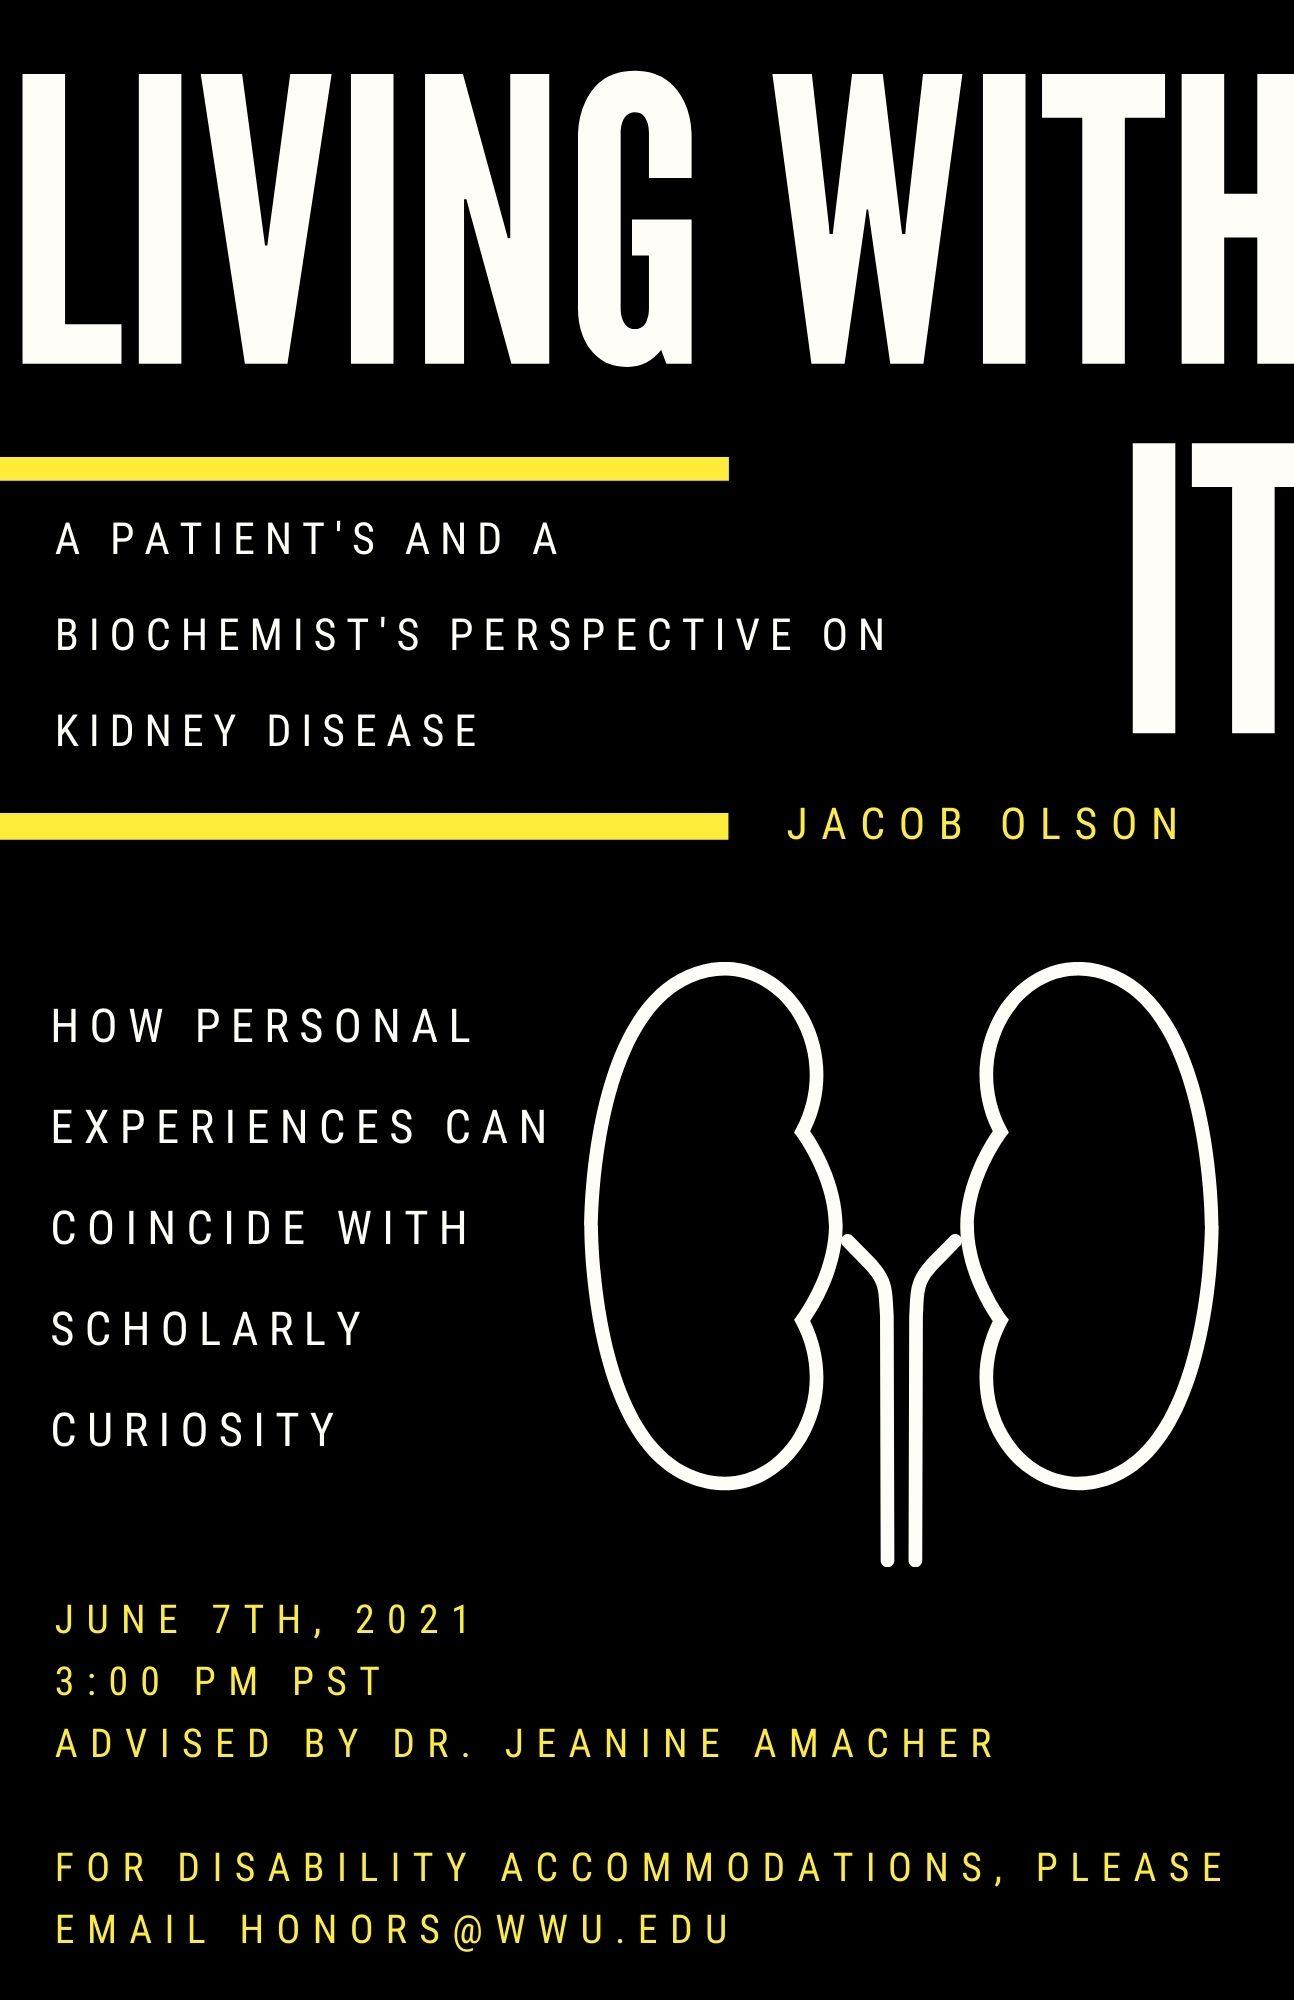 Black poster with minimalist white line drawing of a kidney. White and yellow text reads: "Living With It: A Patient's and a Biochemist's Perspective on Kidney Disease. How personal experiences can coincide with scholarly curiosity. June 7th, 2021 3:00 PM PST. Jacob Olson, advised by Dr. Jeanine Amacher. For Disability Accommodations, please email honors@wwu.edu".